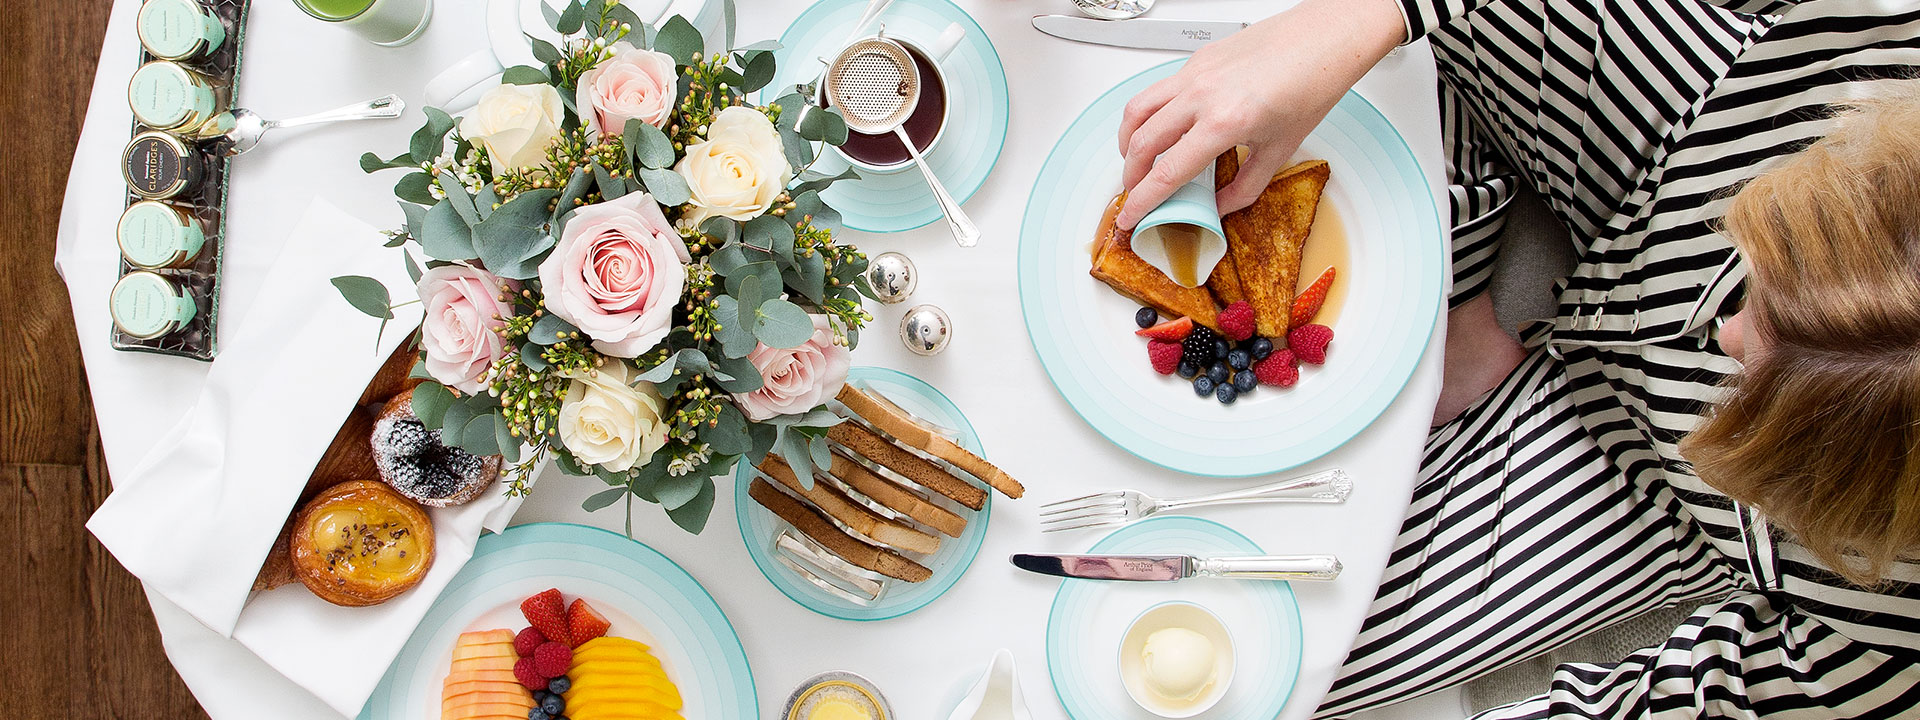 Breakfast with toast, fruit, pastries, and a beautiful bouquet arrangement with morning coffee.